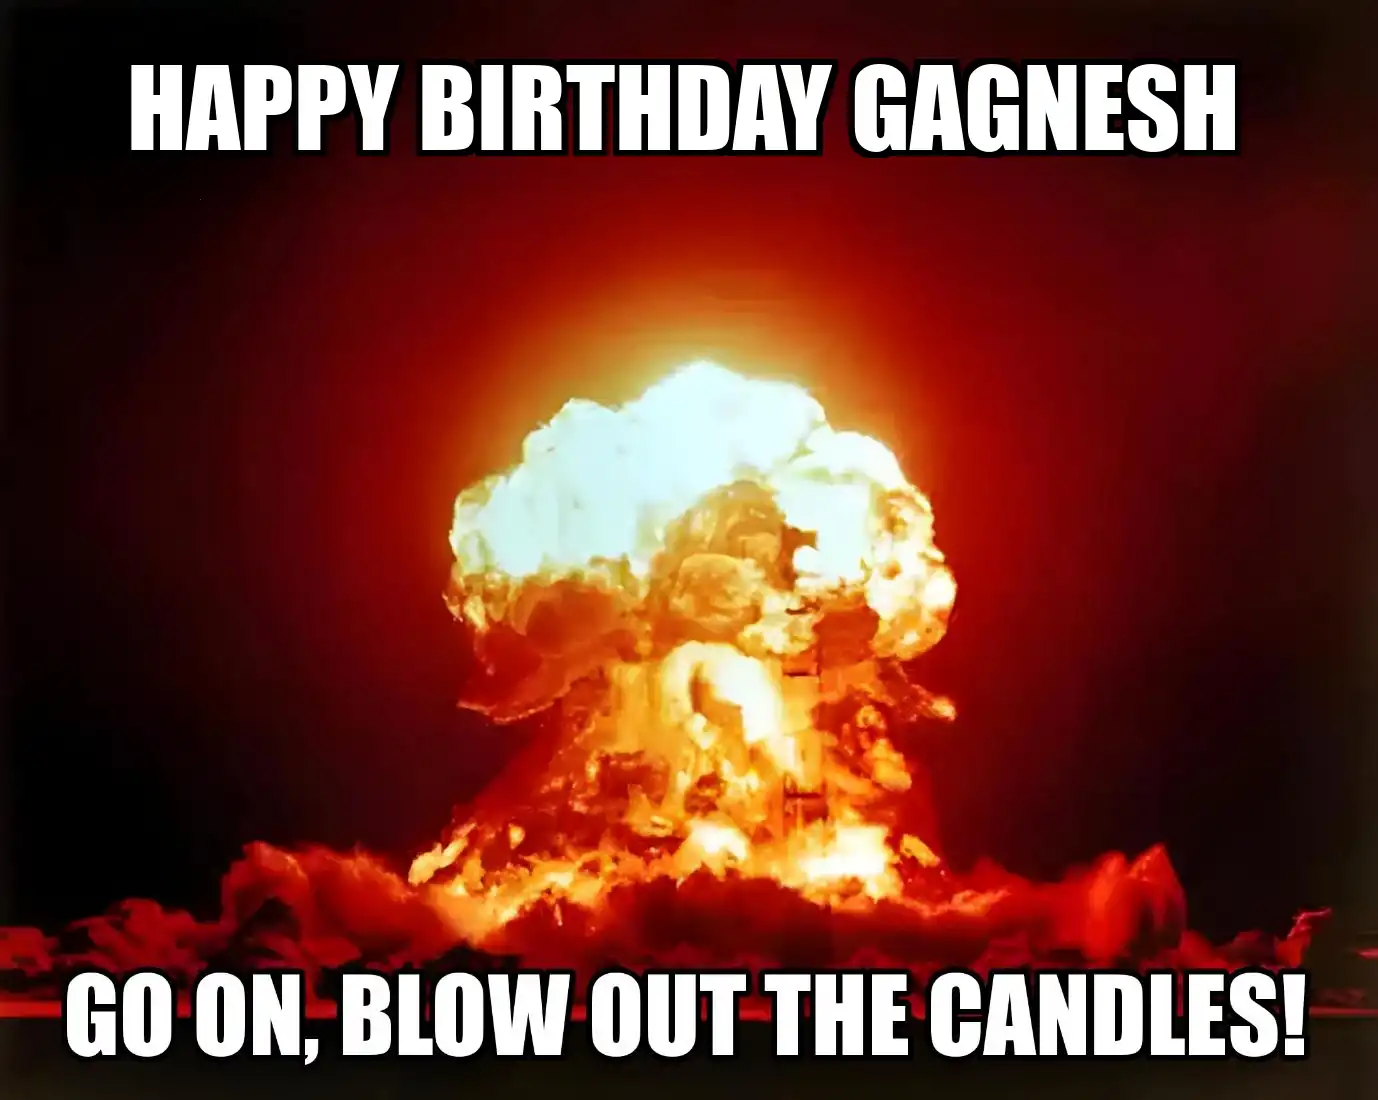 Happy Birthday Gagnesh Go On Blow Out The Candles Meme